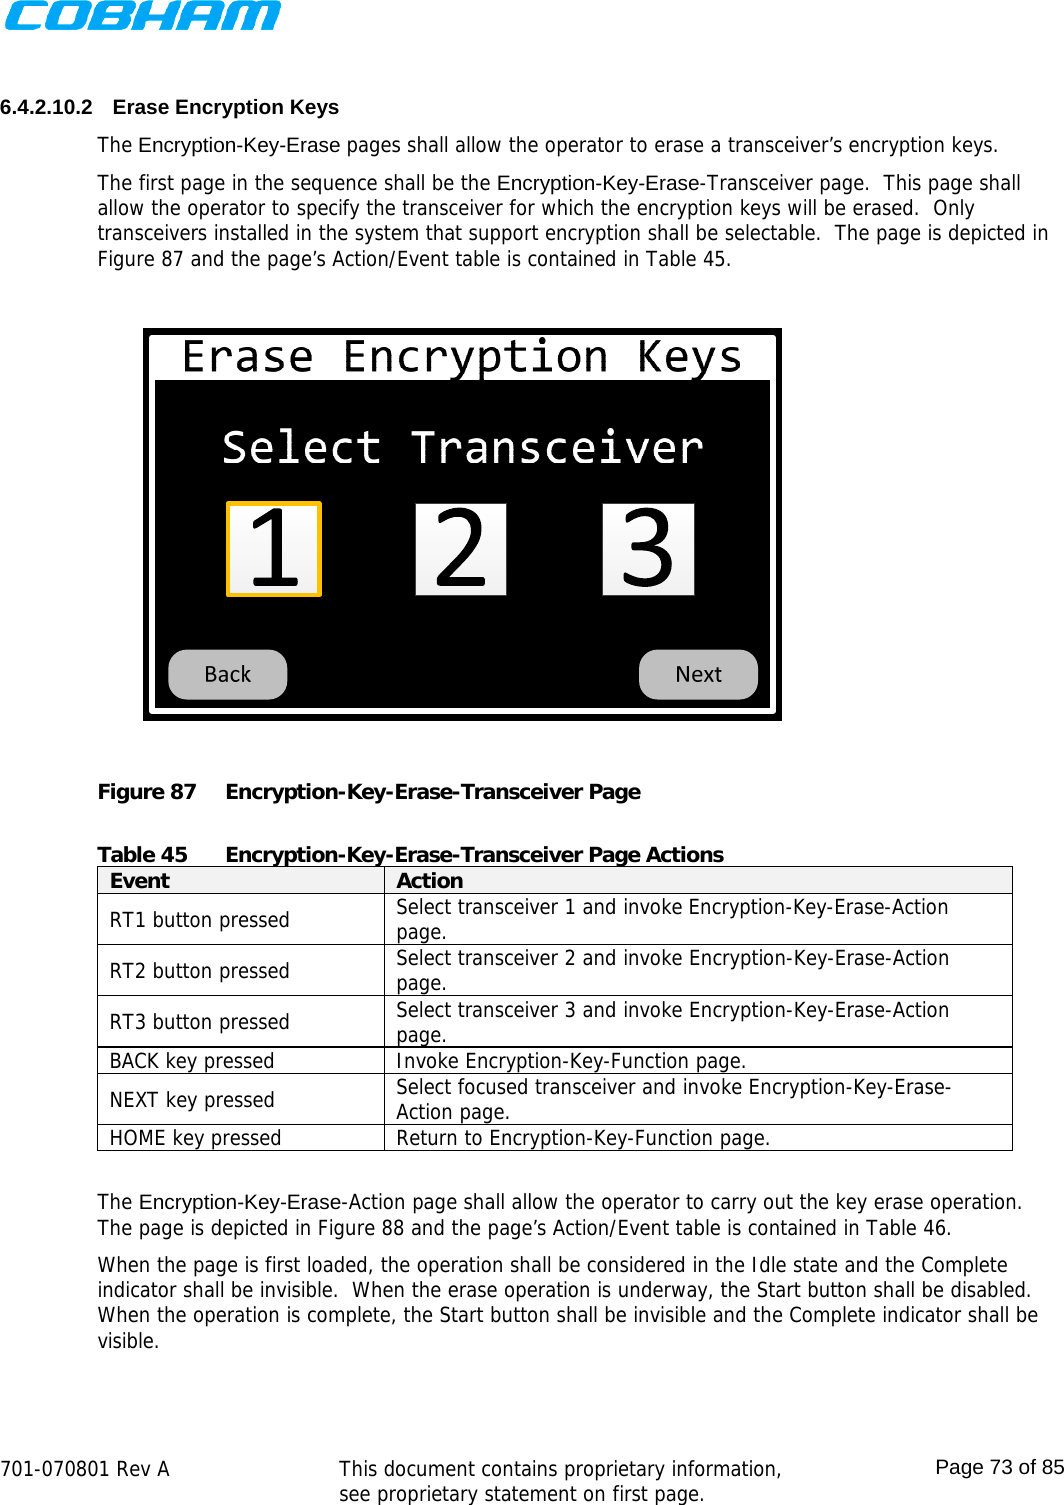    701-070801 Rev A   This document contains proprietary information, see proprietary statement on first page.  Page 73 of 85   6.4.2.10.2  Erase Encryption Keys The Encryption-Key-Erase pages shall allow the operator to erase a transceiver’s encryption keys.  The first page in the sequence shall be the Encryption-Key-Erase-Transceiver page.  This page shall allow the operator to specify the transceiver for which the encryption keys will be erased.  Only transceivers installed in the system that support encryption shall be selectable.  The page is depicted in Figure 87 and the page’s Action/Event table is contained in Table 45.  Figure 87  Encryption-Key-Erase-Transceiver Page  Table 45  Encryption-Key-Erase-Transceiver Page Actions Event  Action RT1 button pressed  Select transceiver 1 and invoke Encryption-Key-Erase-Action page. RT2 button pressed  Select transceiver 2 and invoke Encryption-Key-Erase-Action page. RT3 button pressed  Select transceiver 3 and invoke Encryption-Key-Erase-Action page. BACK key pressed  Invoke Encryption-Key-Function page. NEXT key pressed  Select focused transceiver and invoke Encryption-Key-Erase-Action page. HOME key pressed  Return to Encryption-Key-Function page.  The Encryption-Key-Erase-Action page shall allow the operator to carry out the key erase operation.  The page is depicted in Figure 88 and the page’s Action/Event table is contained in Table 46. When the page is first loaded, the operation shall be considered in the Idle state and the Complete indicator shall be invisible.  When the erase operation is underway, the Start button shall be disabled.  When the operation is complete, the Start button shall be invisible and the Complete indicator shall be visible.  